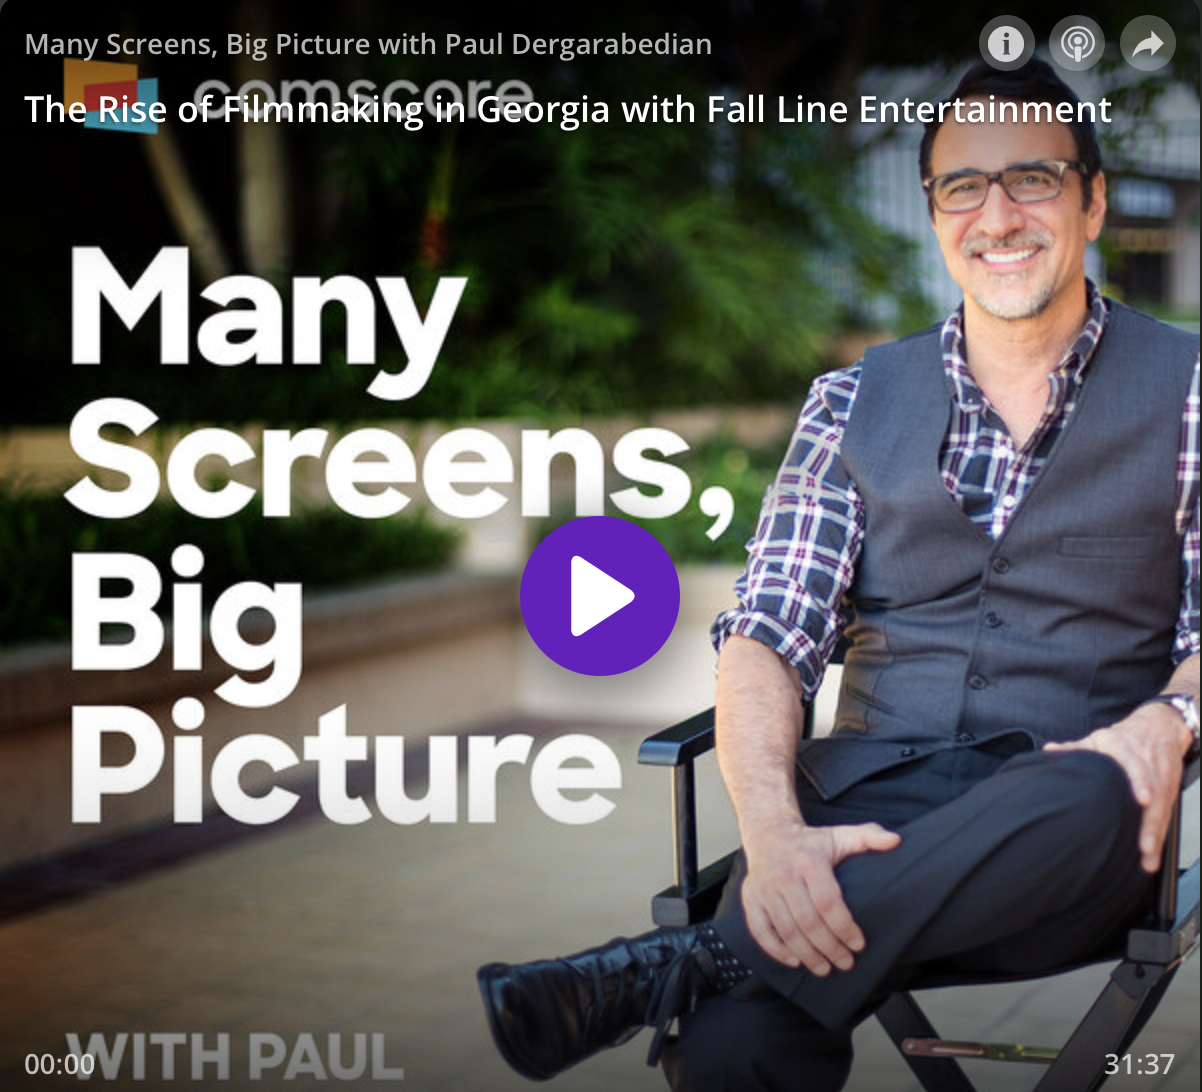 FLE on “Many Screens, Big Picture” podcast